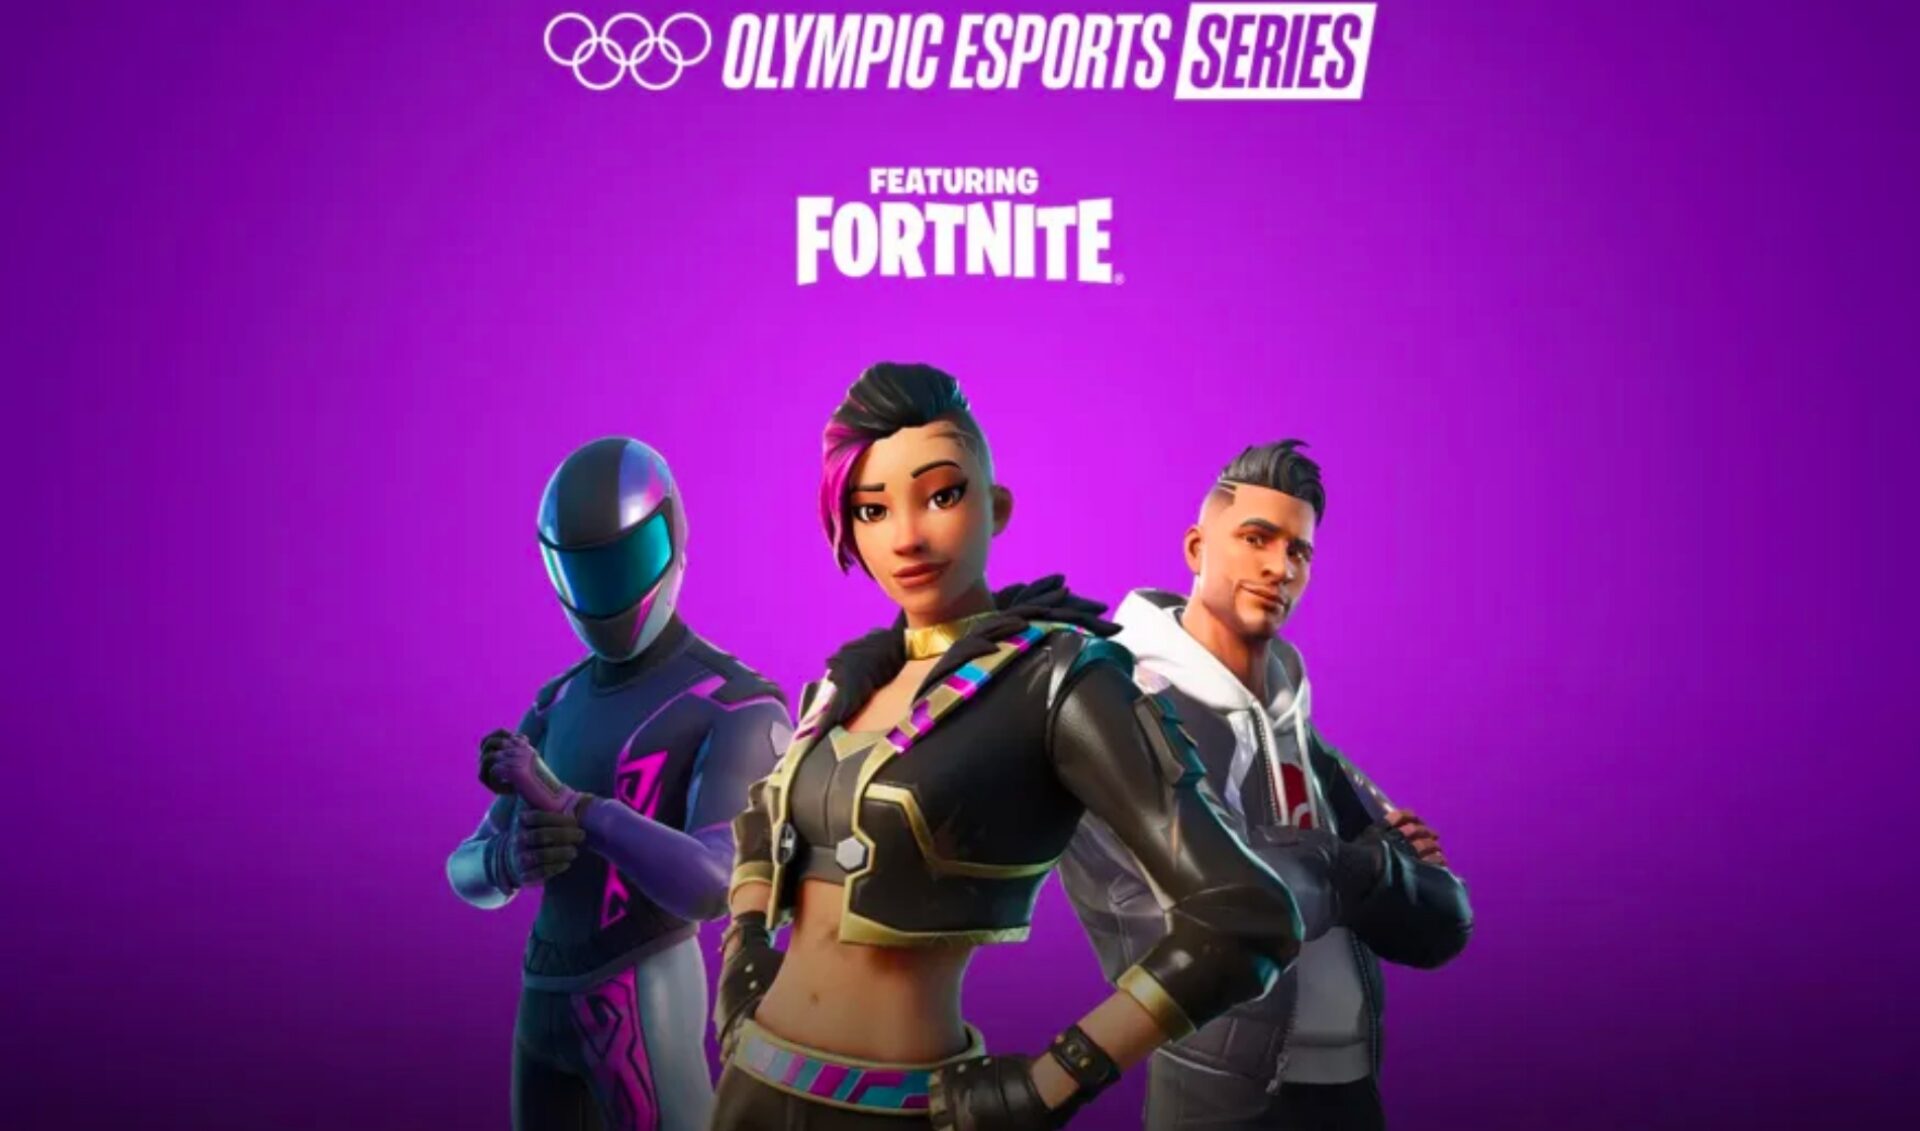 After facing criticism for game choices, the Olympic Esports Series adds ‘Fortnite’